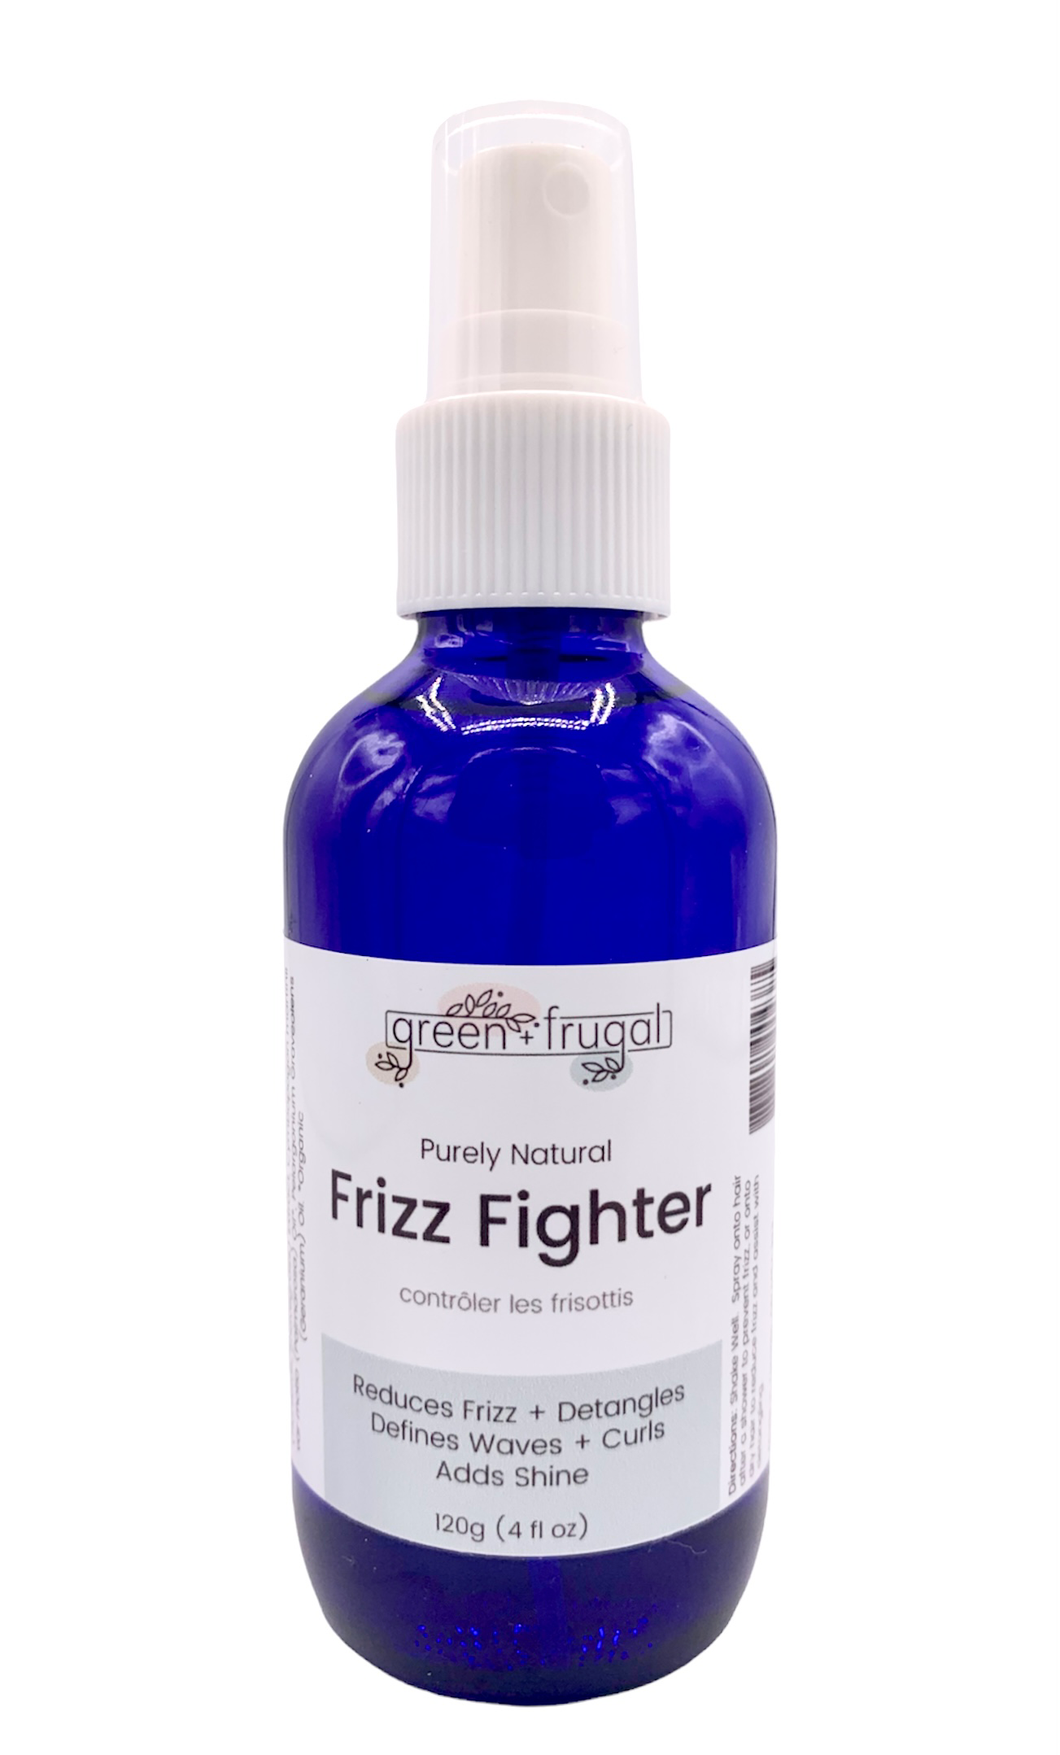 Frizz Fighter